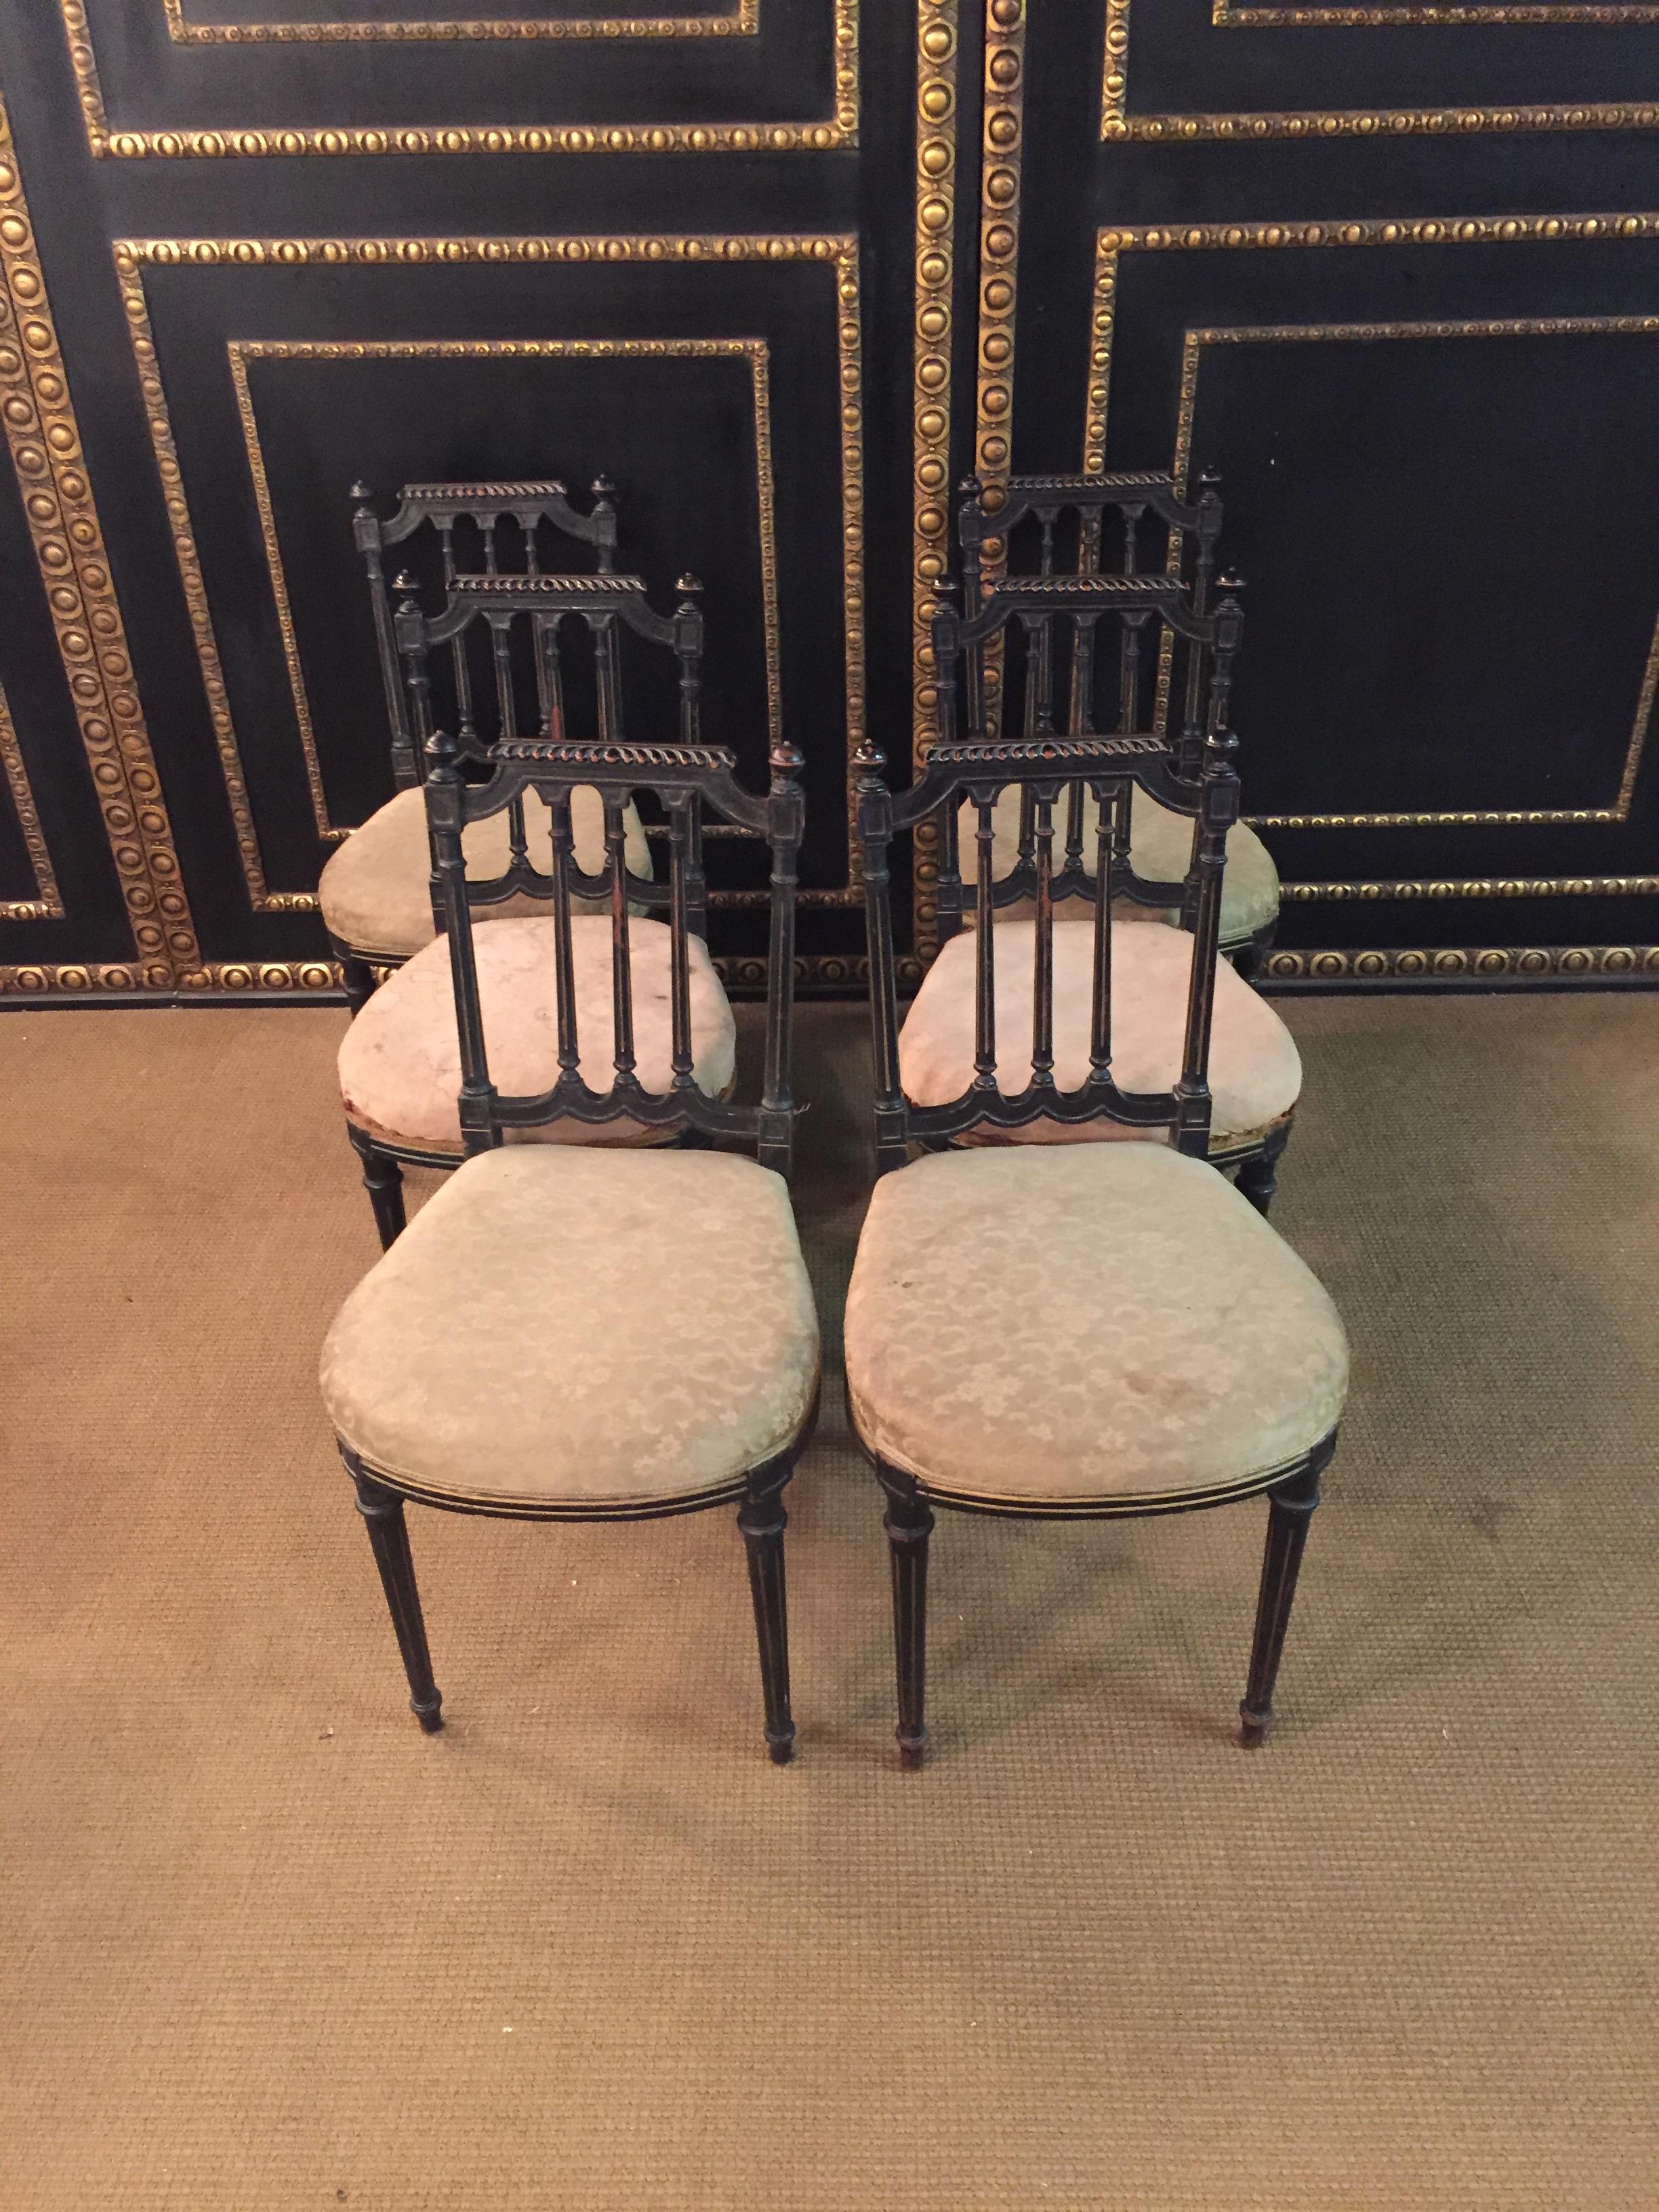 Rare version of 6 chairs in Louis XV style.
Backrest with 5 carved columns.